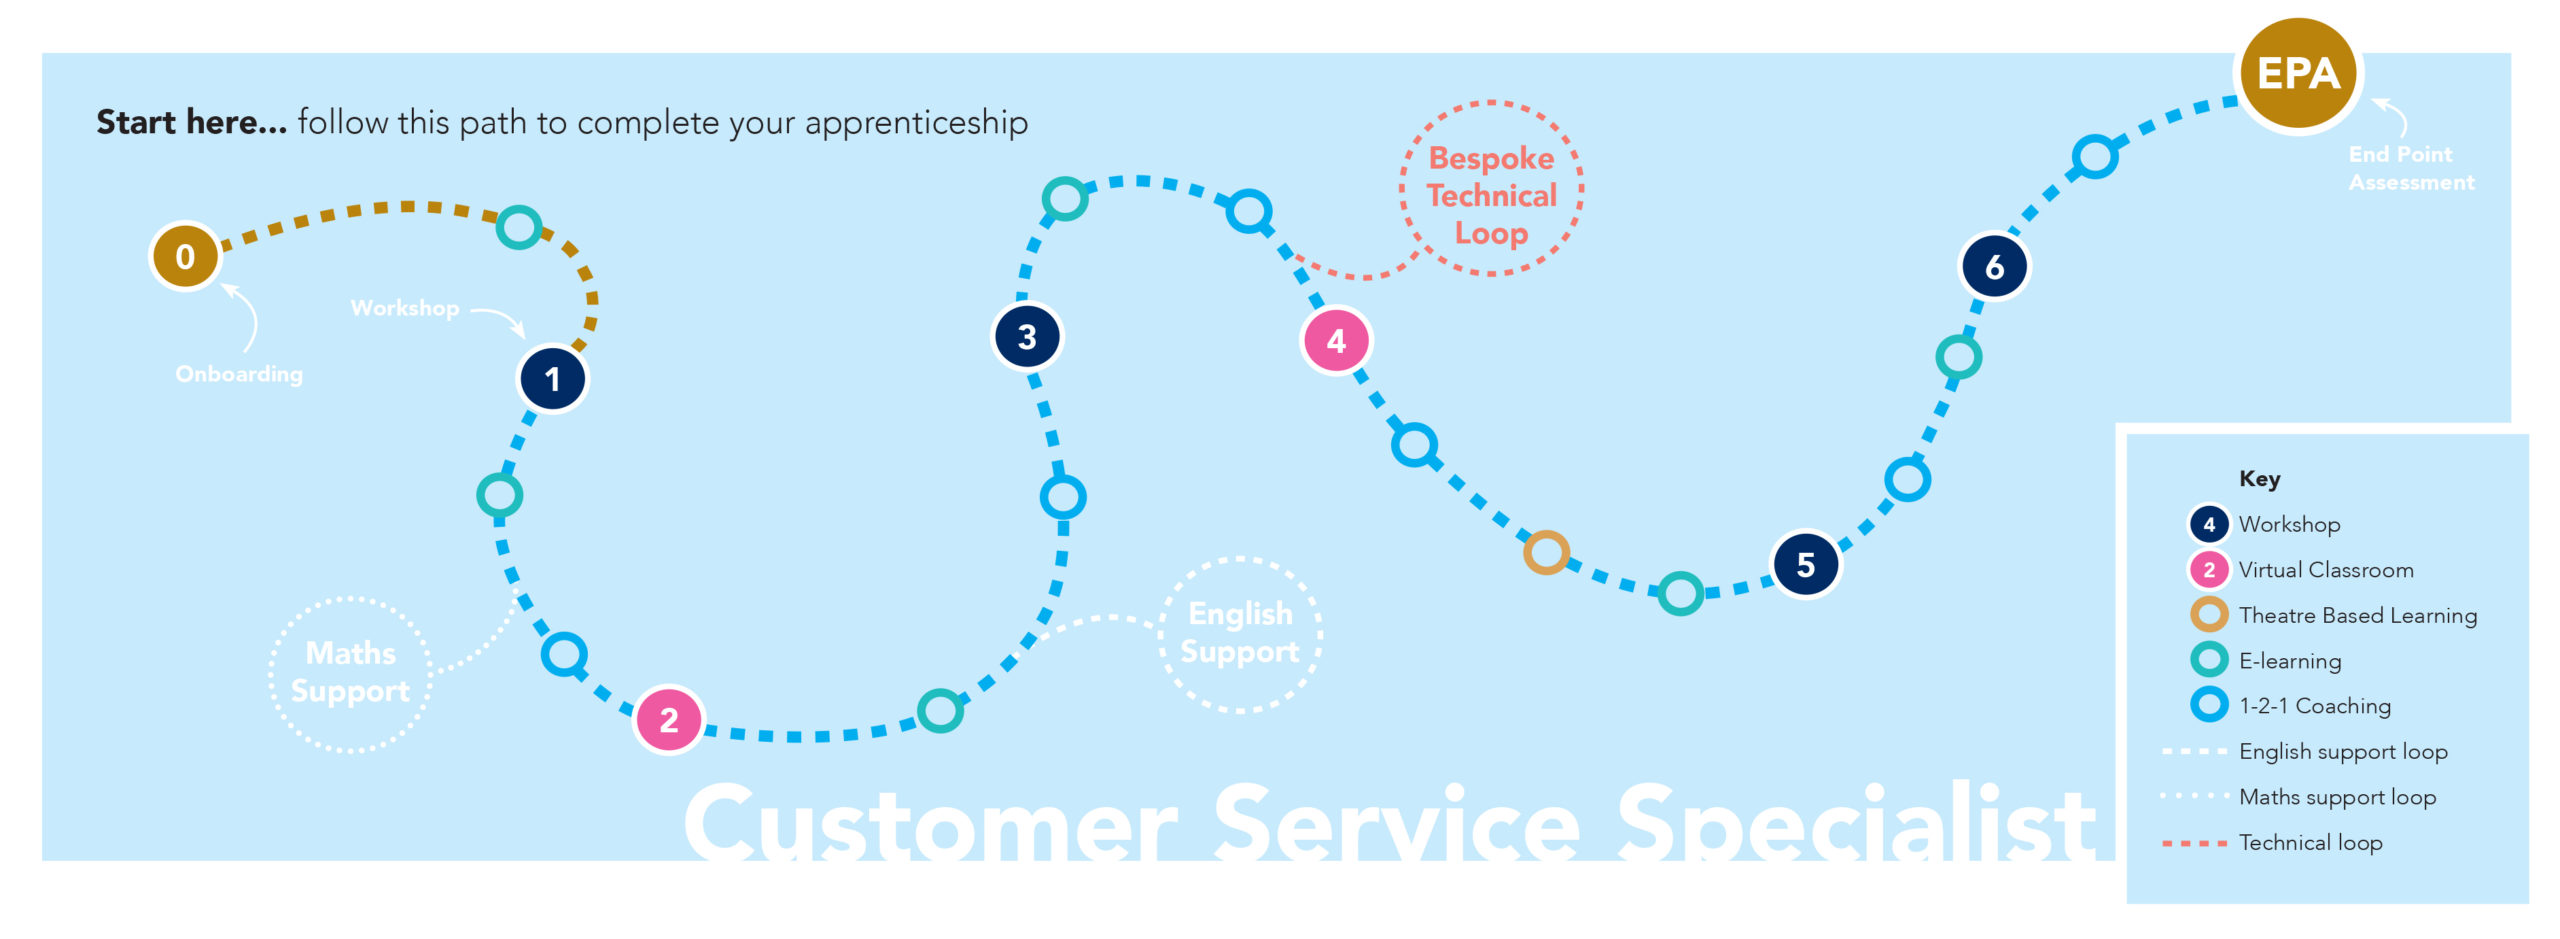 Customer Service Specialist apprenticeship journey learning map